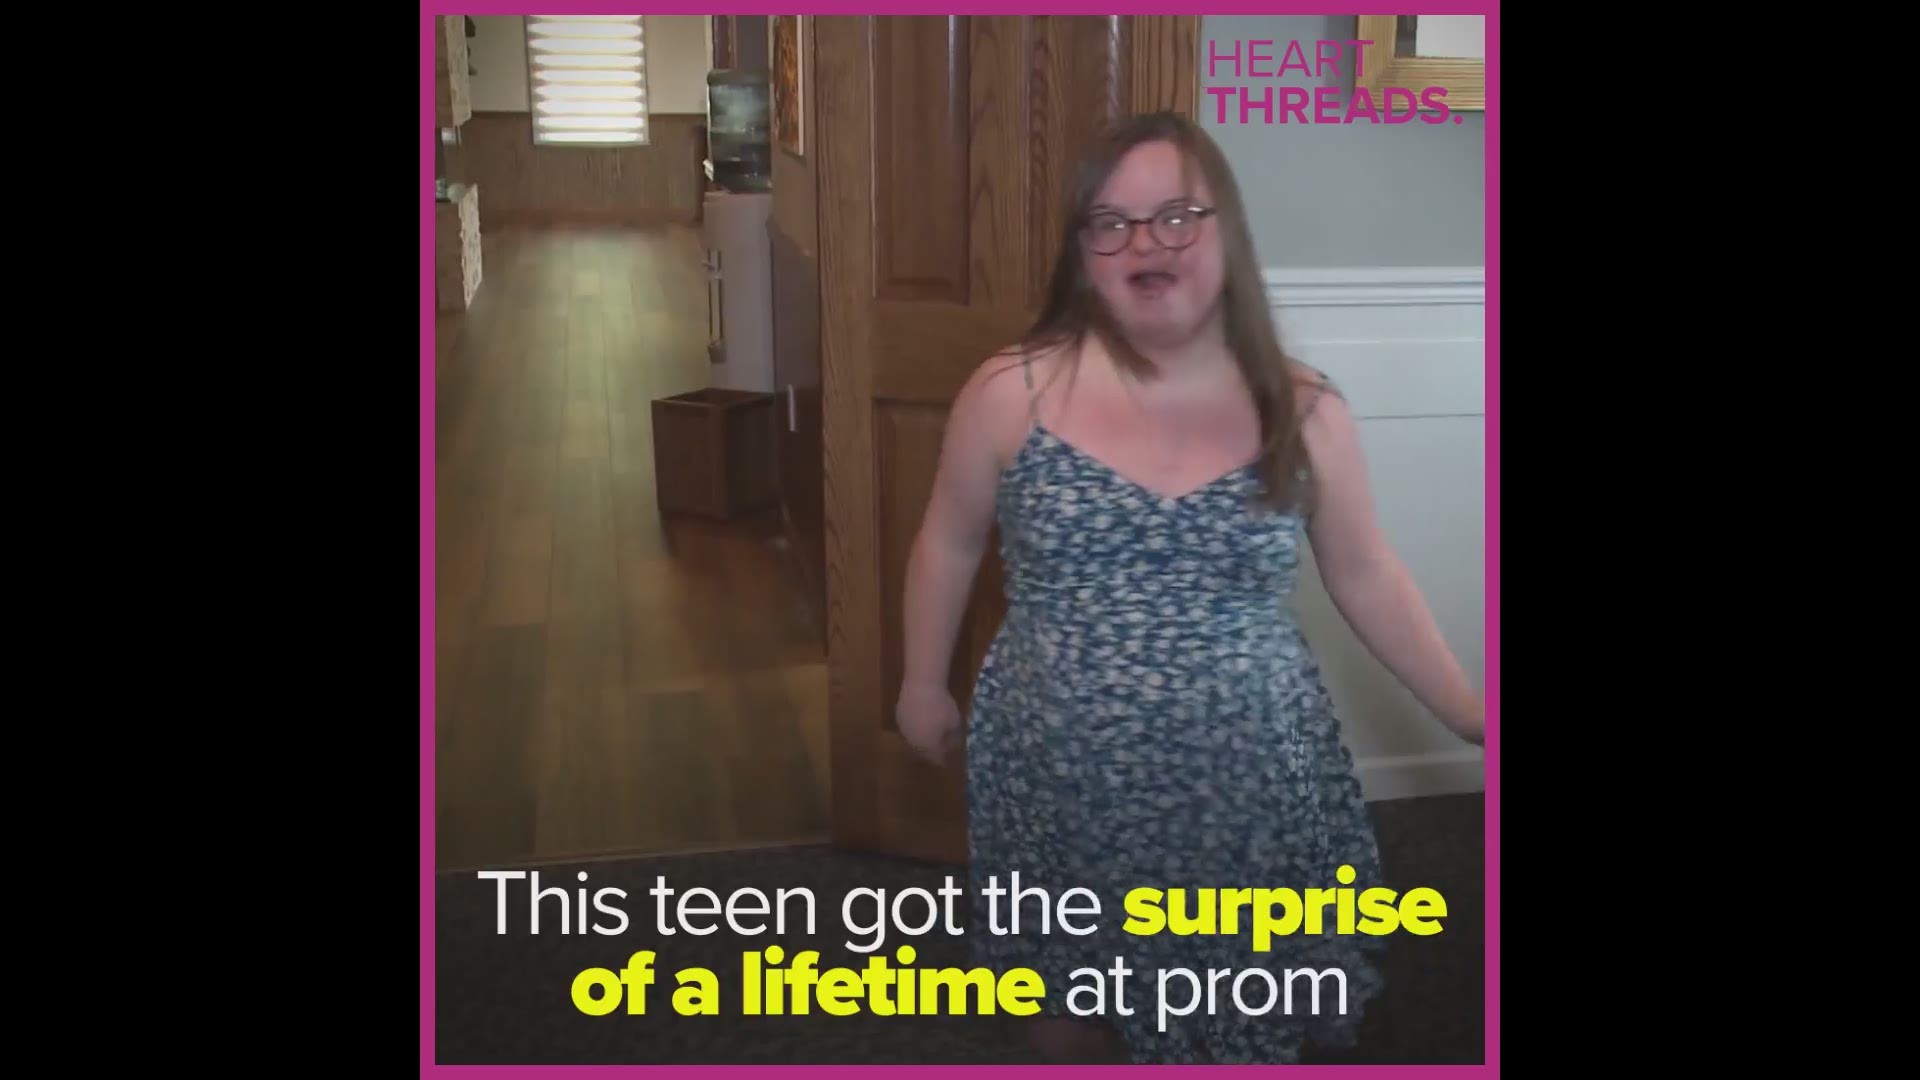 Madisyn has Down syndrome and was born with a rare heart condition, but she's thriving as one of the most active and popular students at her school. And now her classmates have crowned her prom queen.